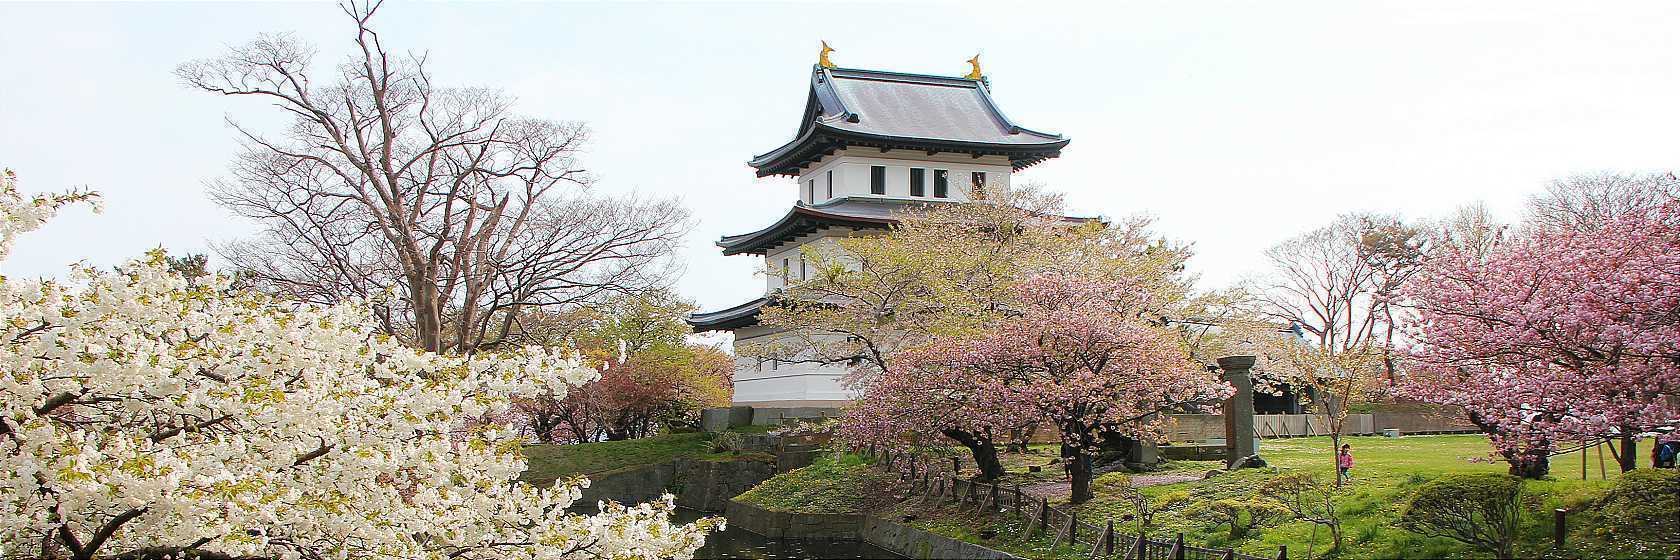 18-intriguing-facts-about-matsumae-castle